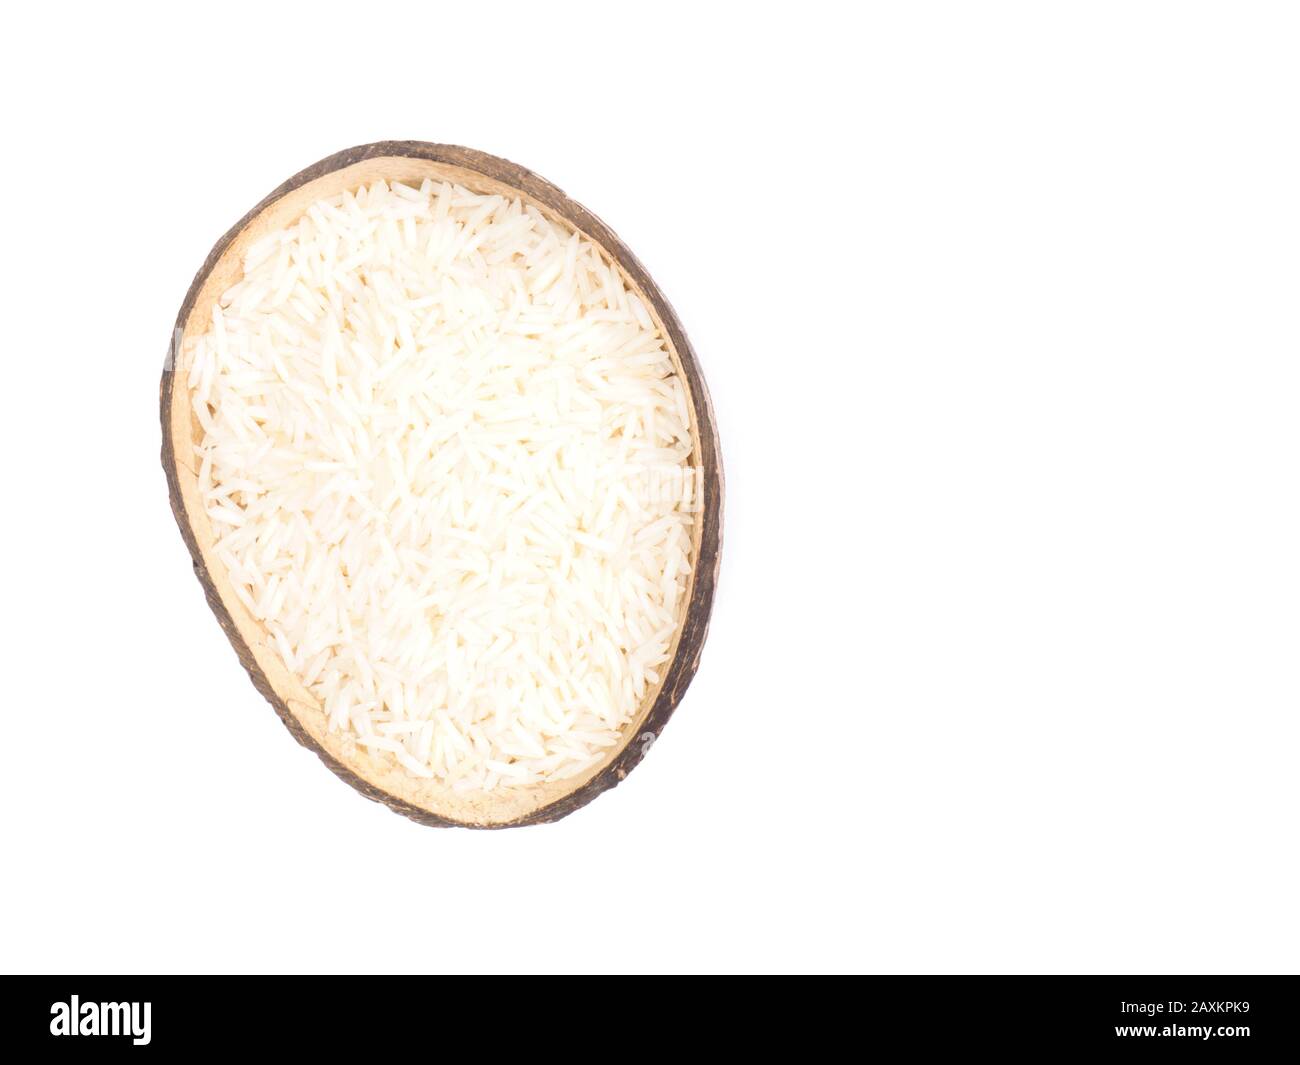 Indian long grain Basmati rice in half coconut shell isolated on white. Indian cuisine, ayurveda, naturopathy concept Stock Photo